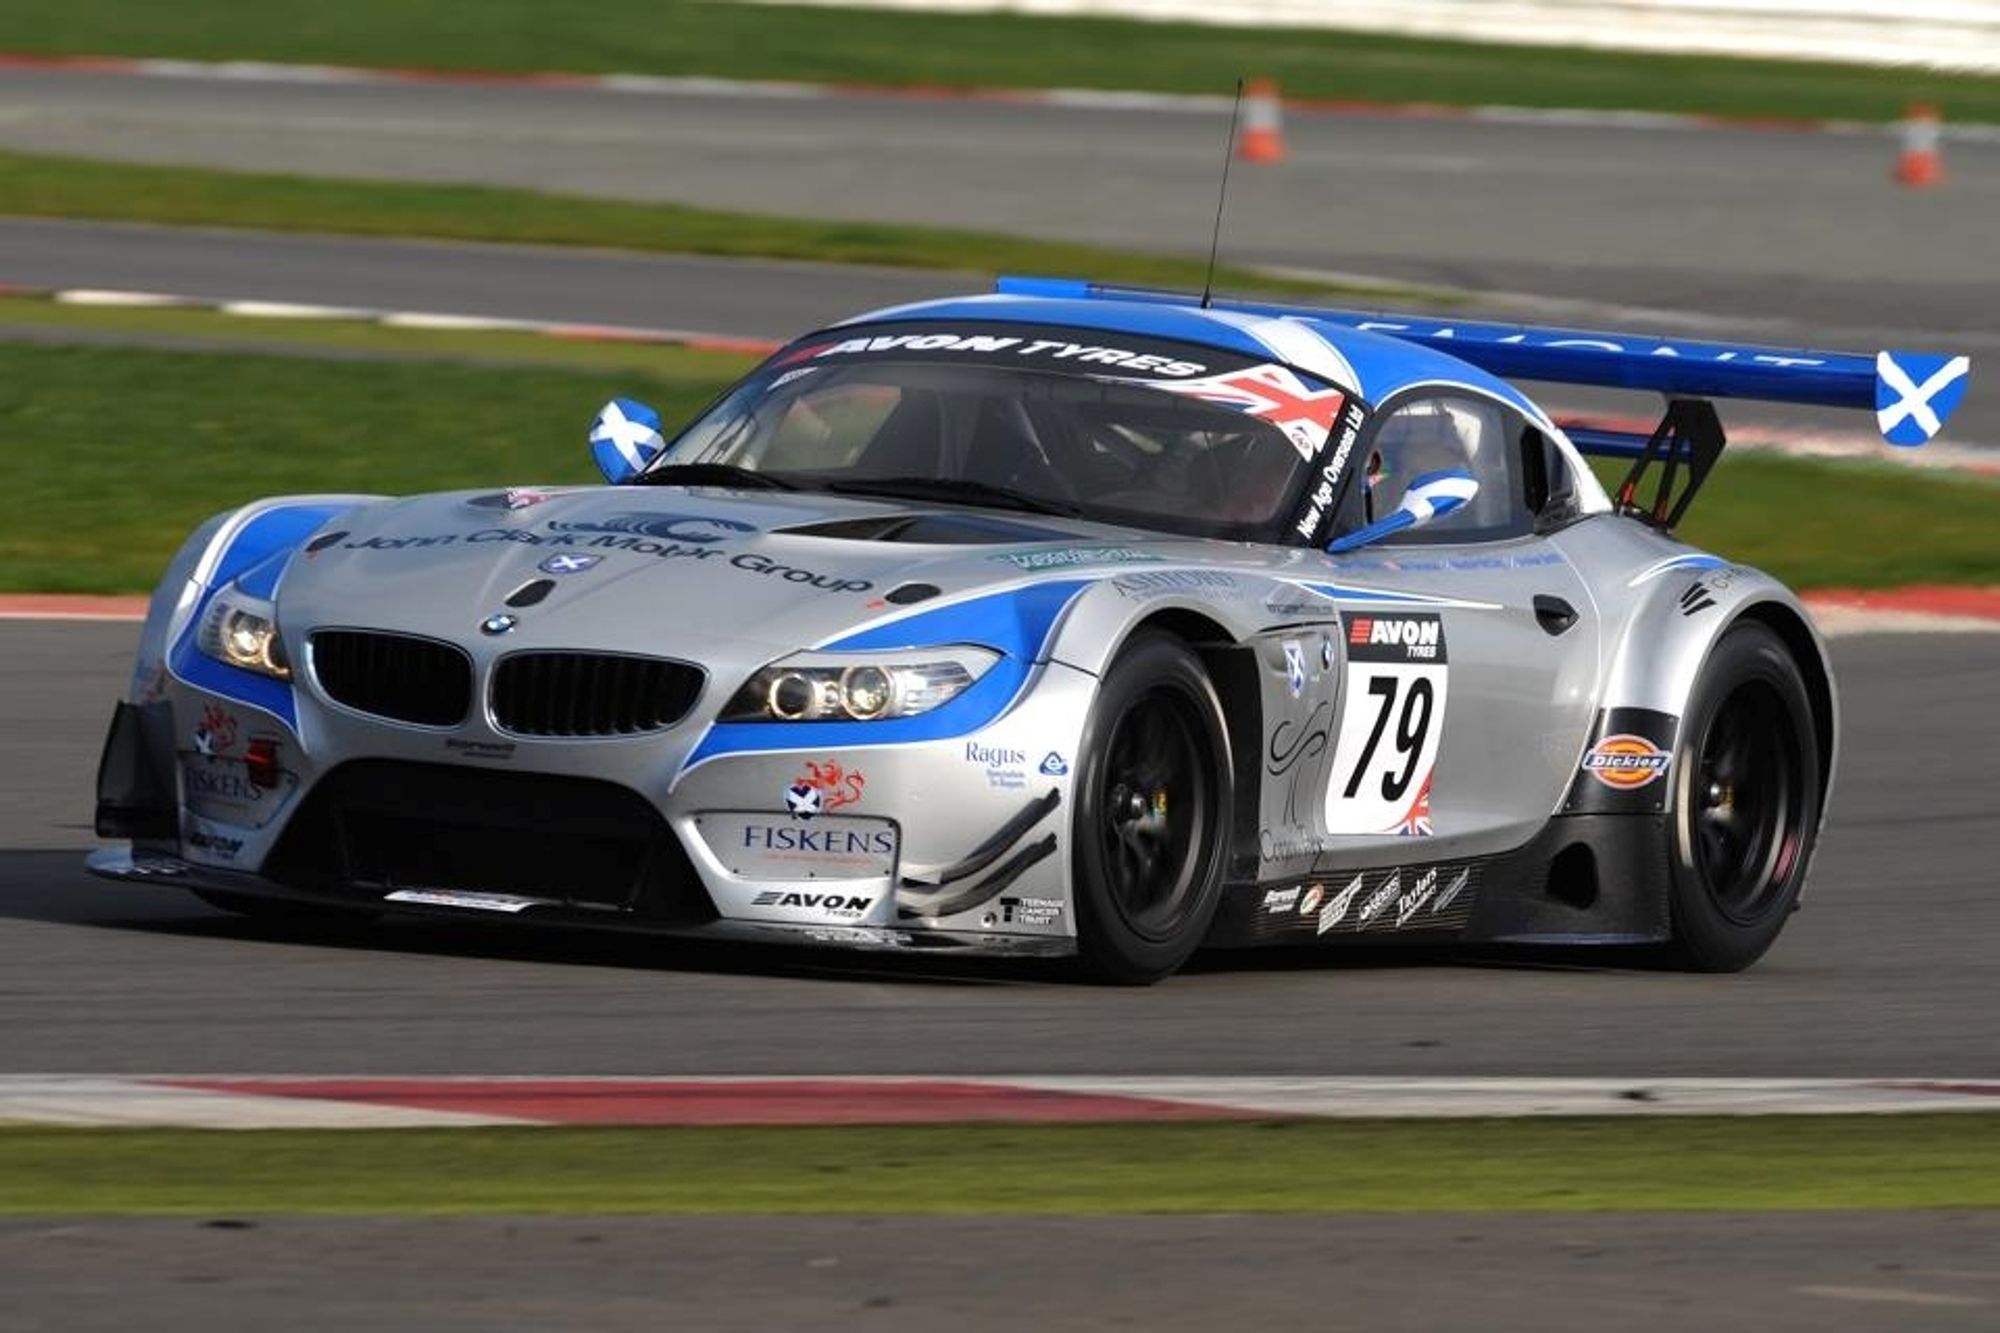 Fiskens to sponsor racing legends Ecurie Ecosse for 2012 competitive revival